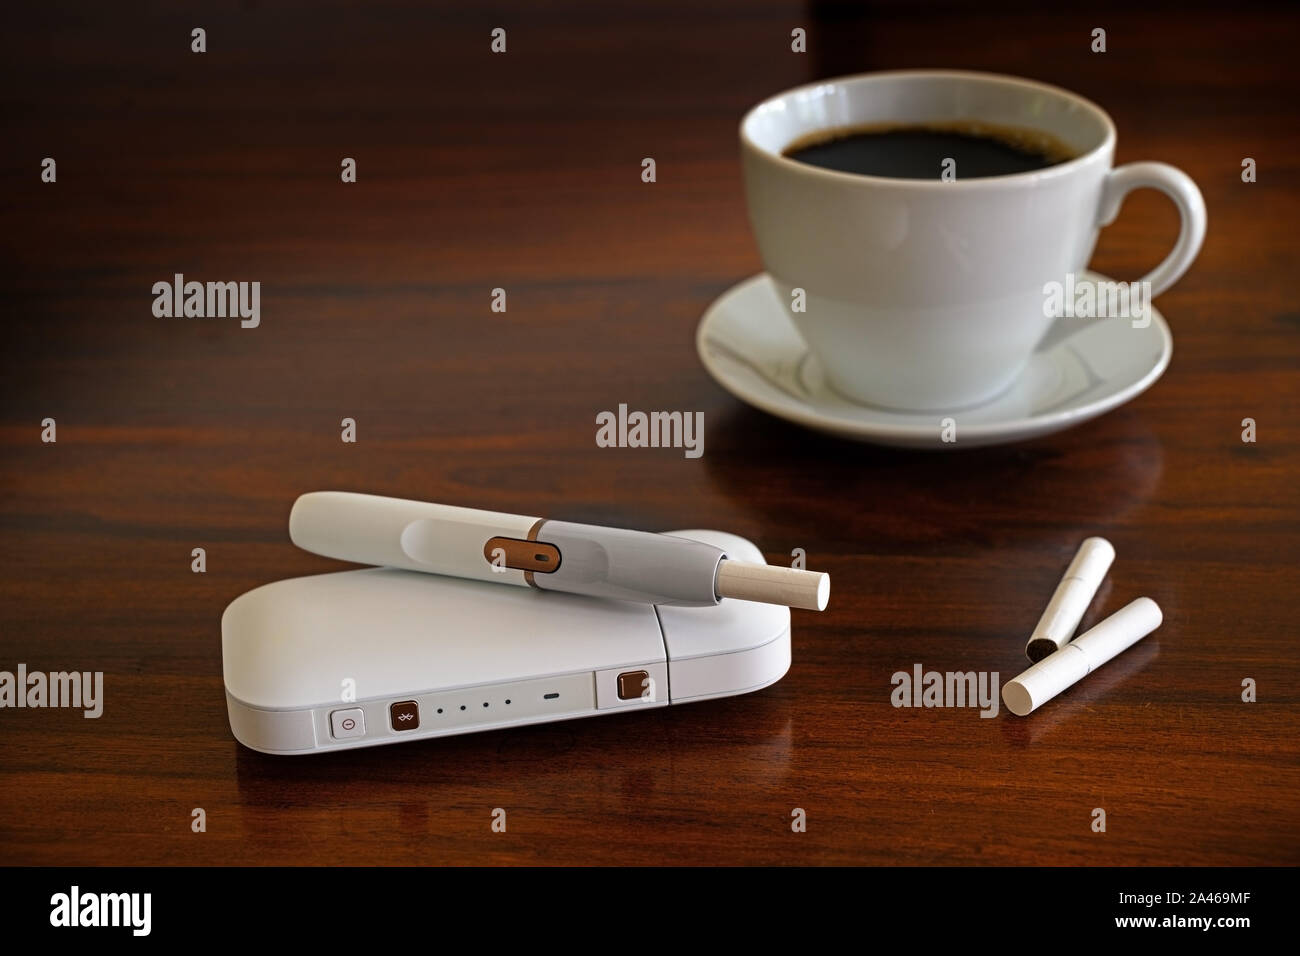 Heating tobacco system and a cup of coffee on a brown table, e-cigarette with tobacco sticks that generates a nicotine aerosol with allegedly fewer to Stock Photo